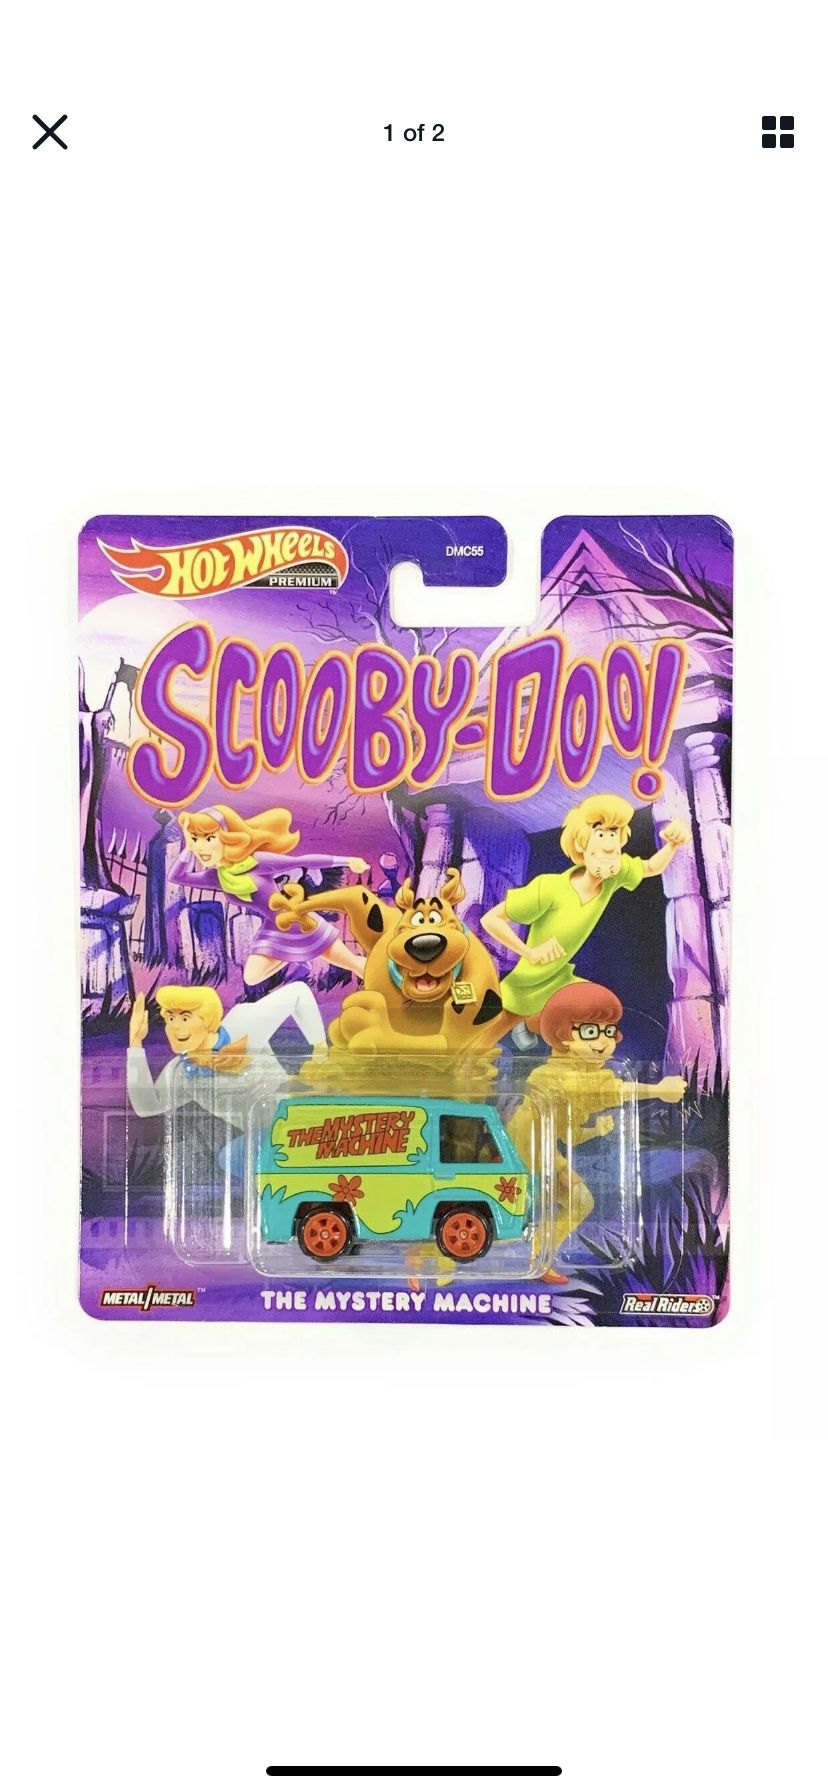 Hot wheels scooby doo mystery machine with real riders